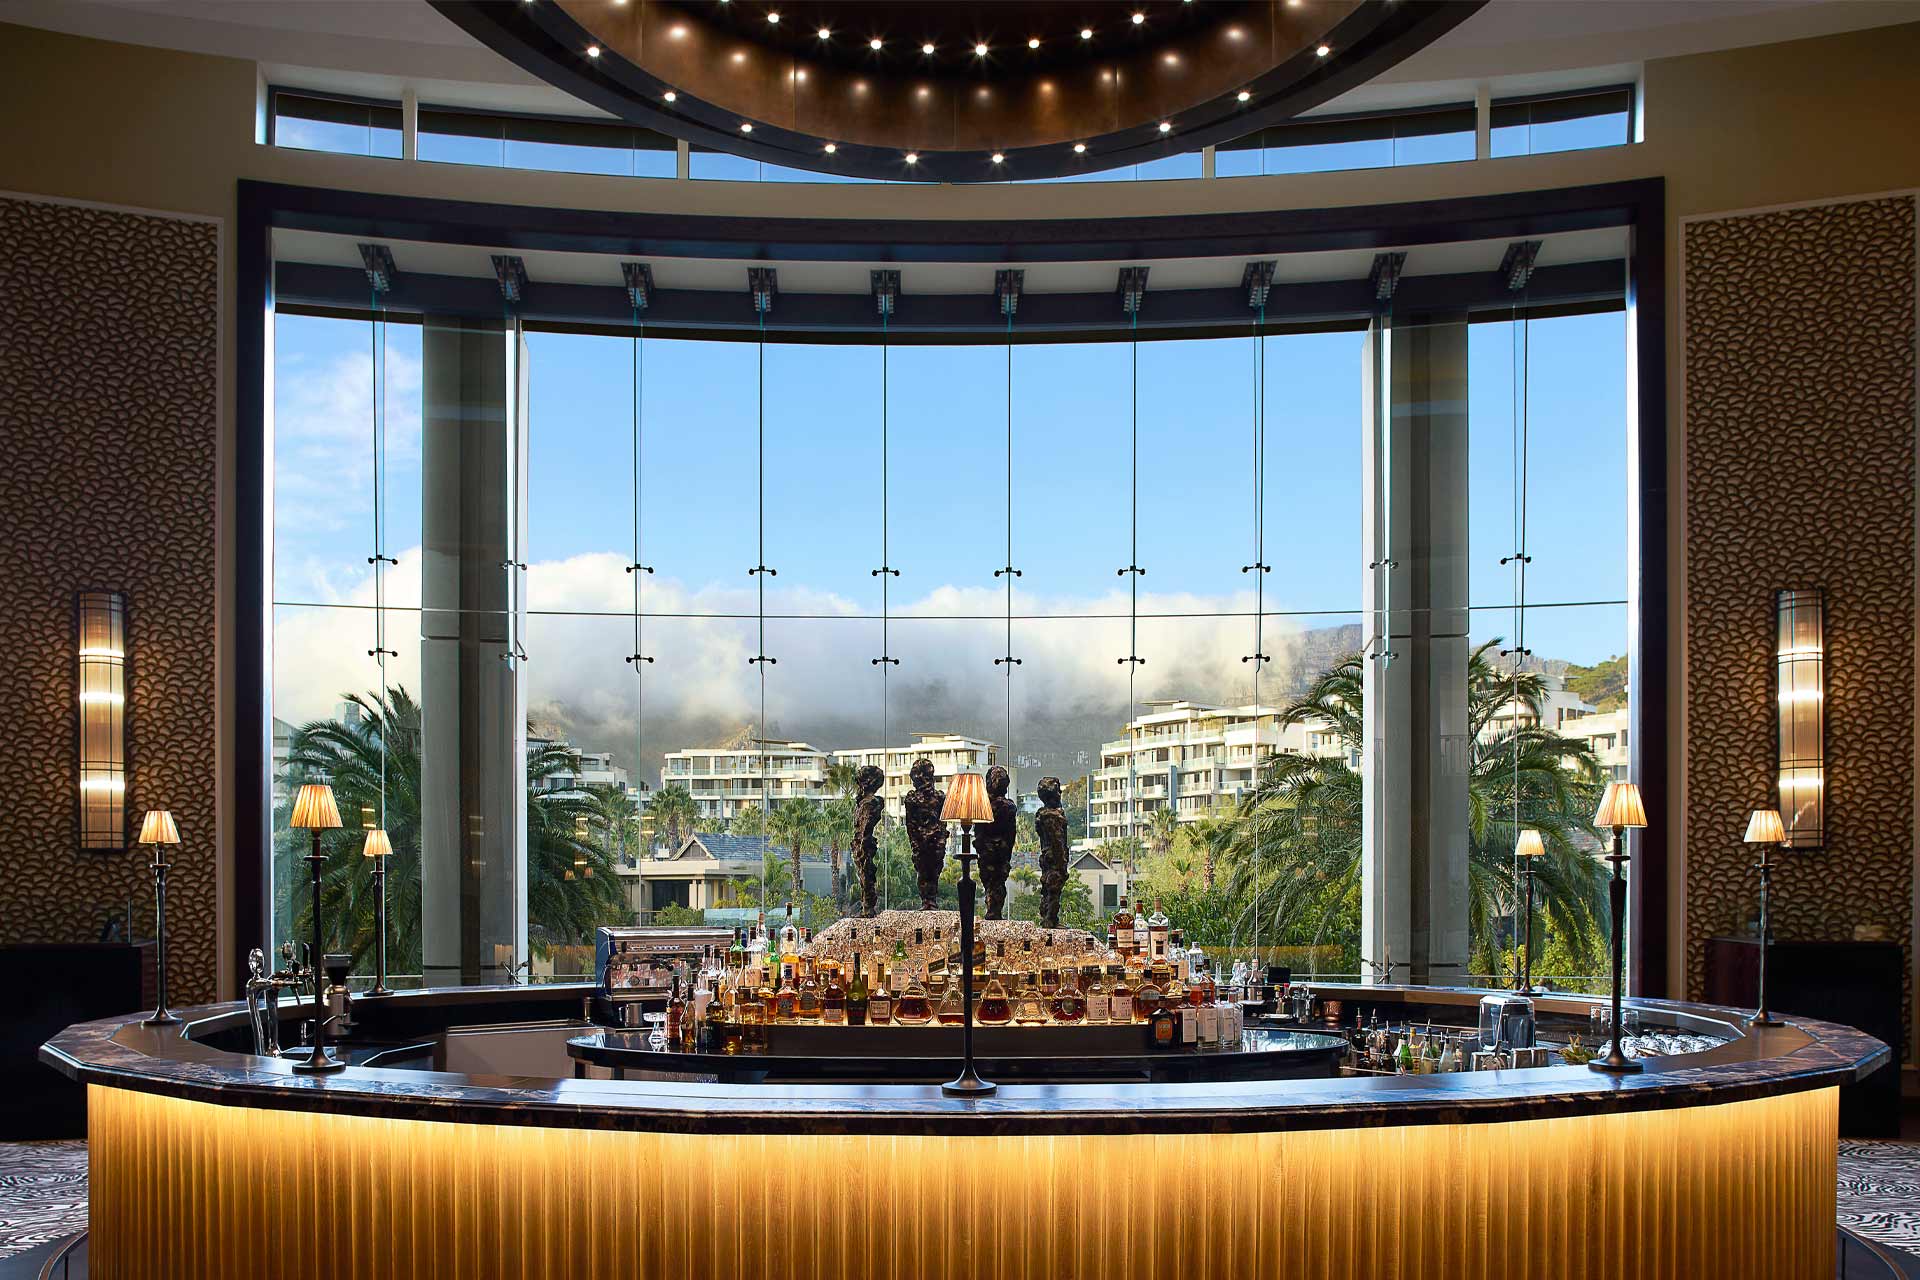 The Vista Bar & Lounge at One&Only Cape Town in South Africa